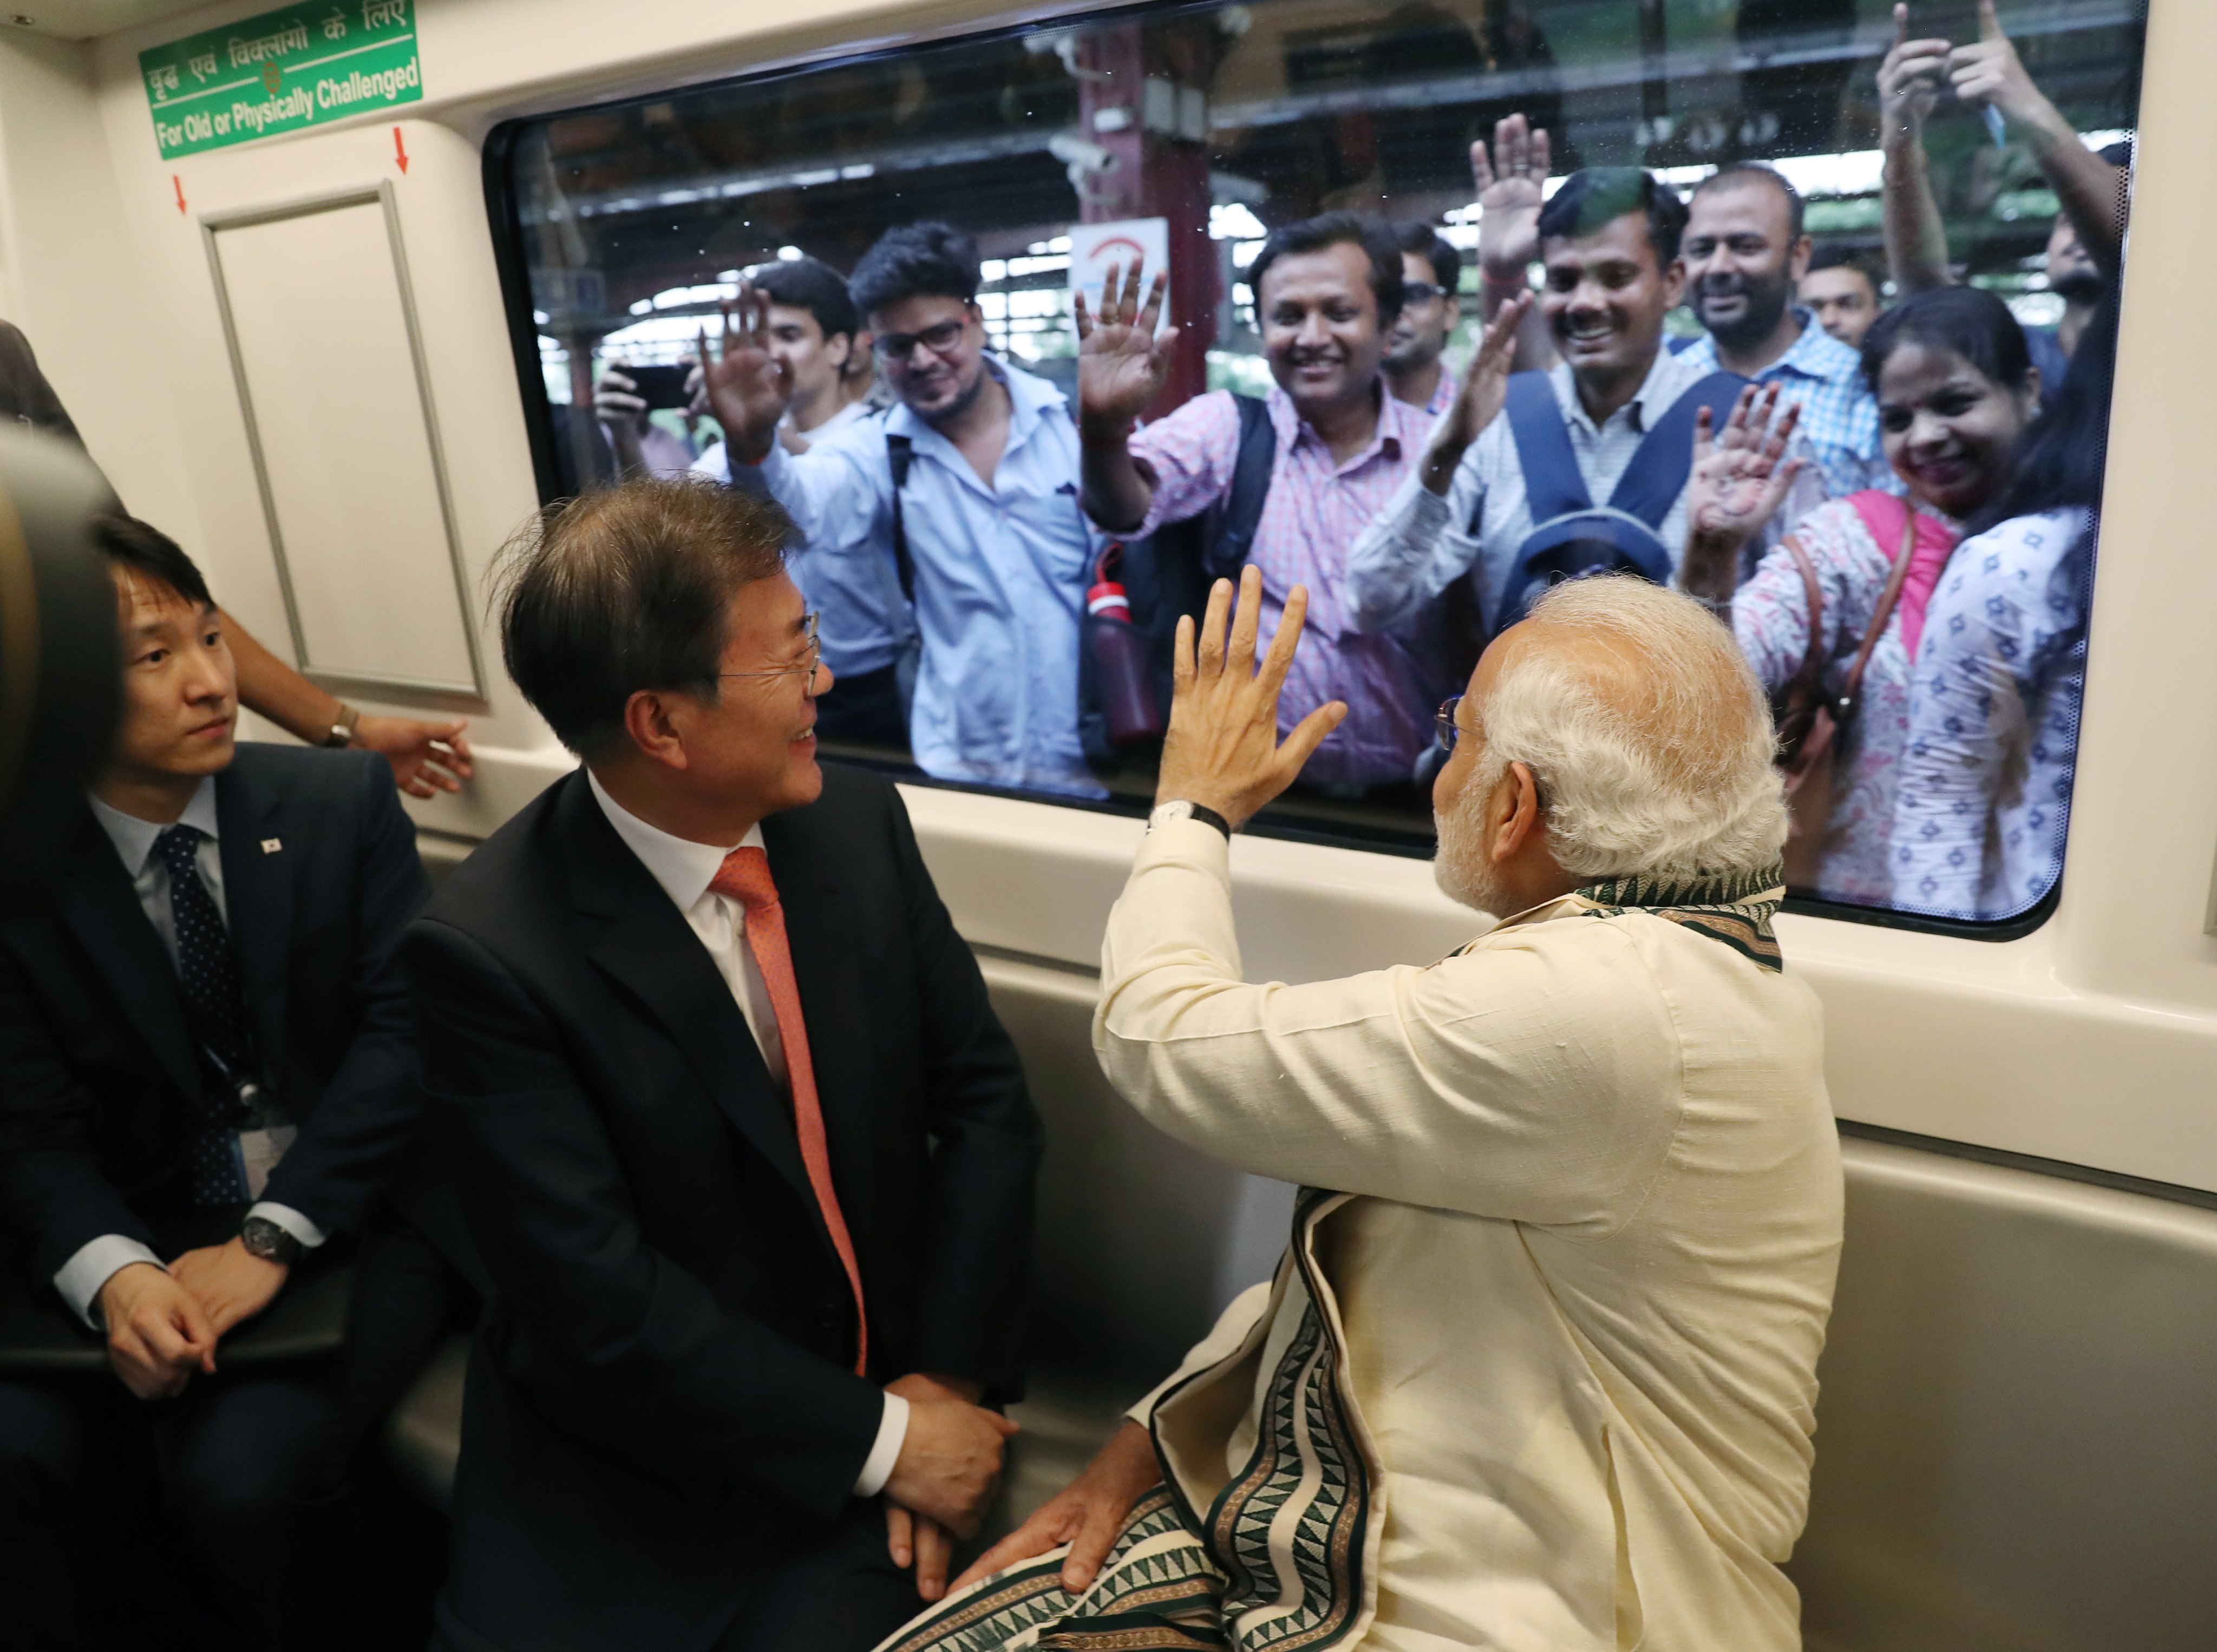 South Korea’s then president Moon Jae-in and Indian Prime Minister Narendra Modi greet onlookers during their subway ride to the Samsung Electronics factory in Uttar Pradesh, northern India, on July 9, 2018. South Korean firms are increasingly looking to India as a target for investment and expansion. Photo: EPA-EFE